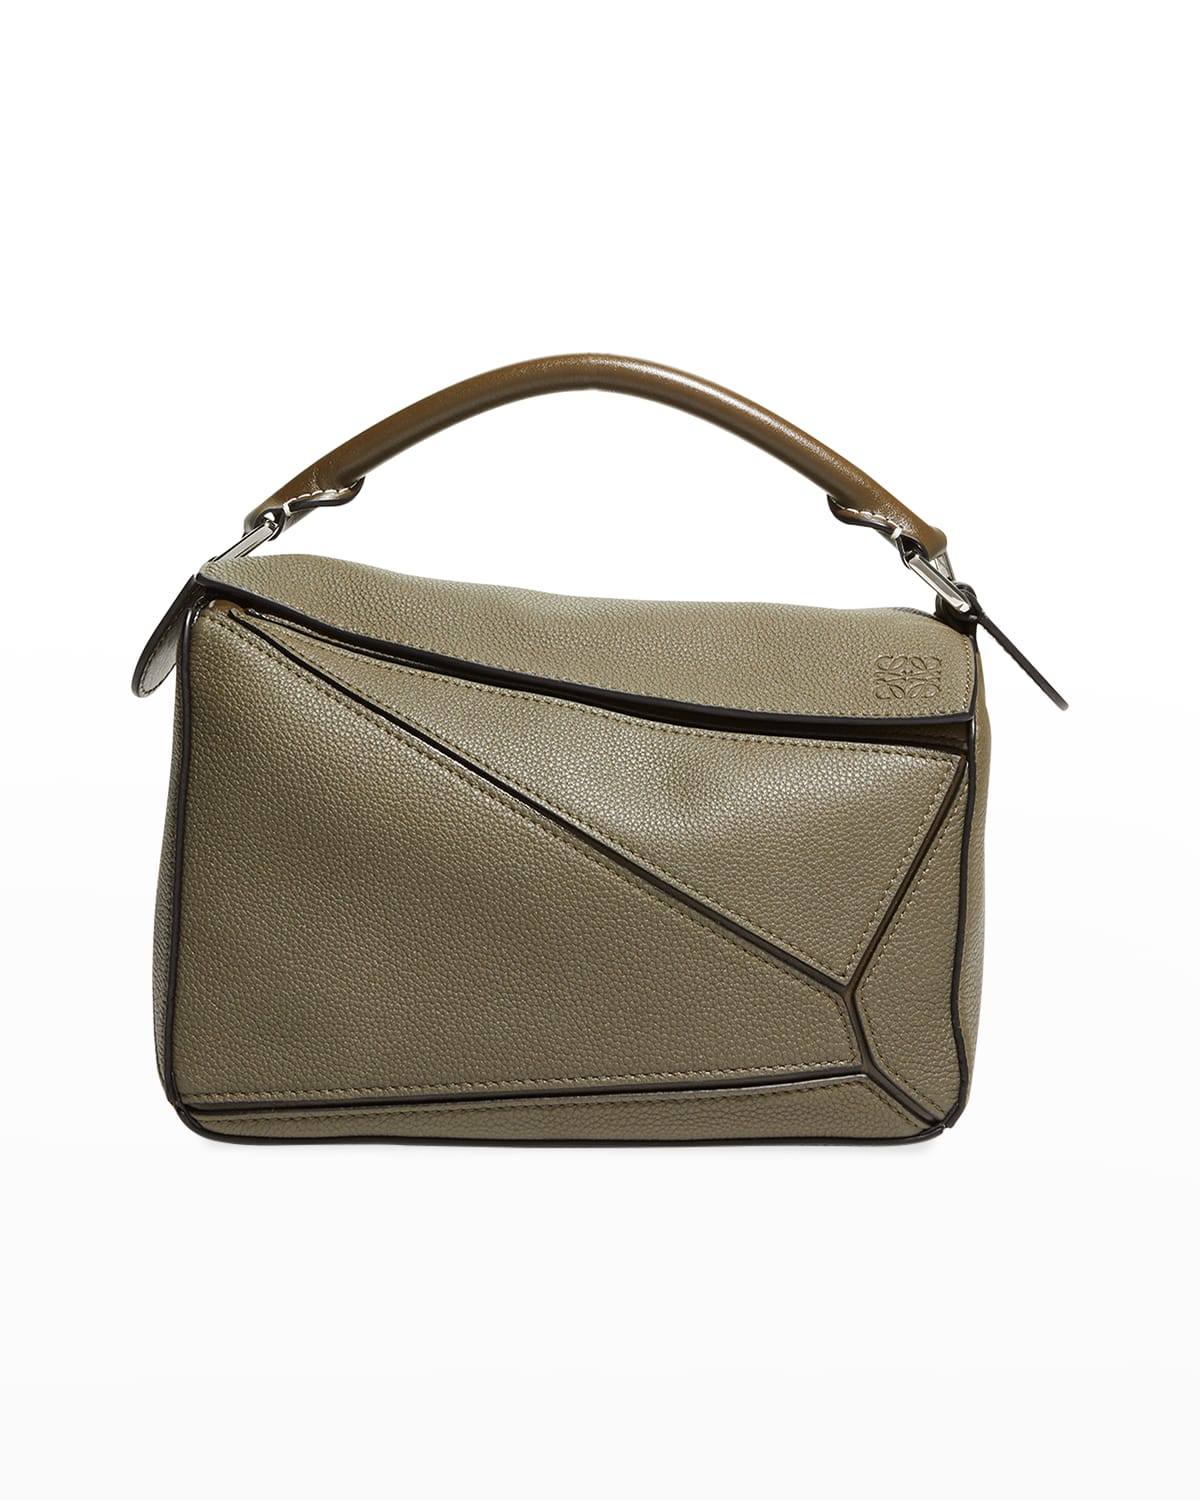 Loewe Puzzle Small Colorblock Grained Leather Satchel Bag | Neiman Marcus